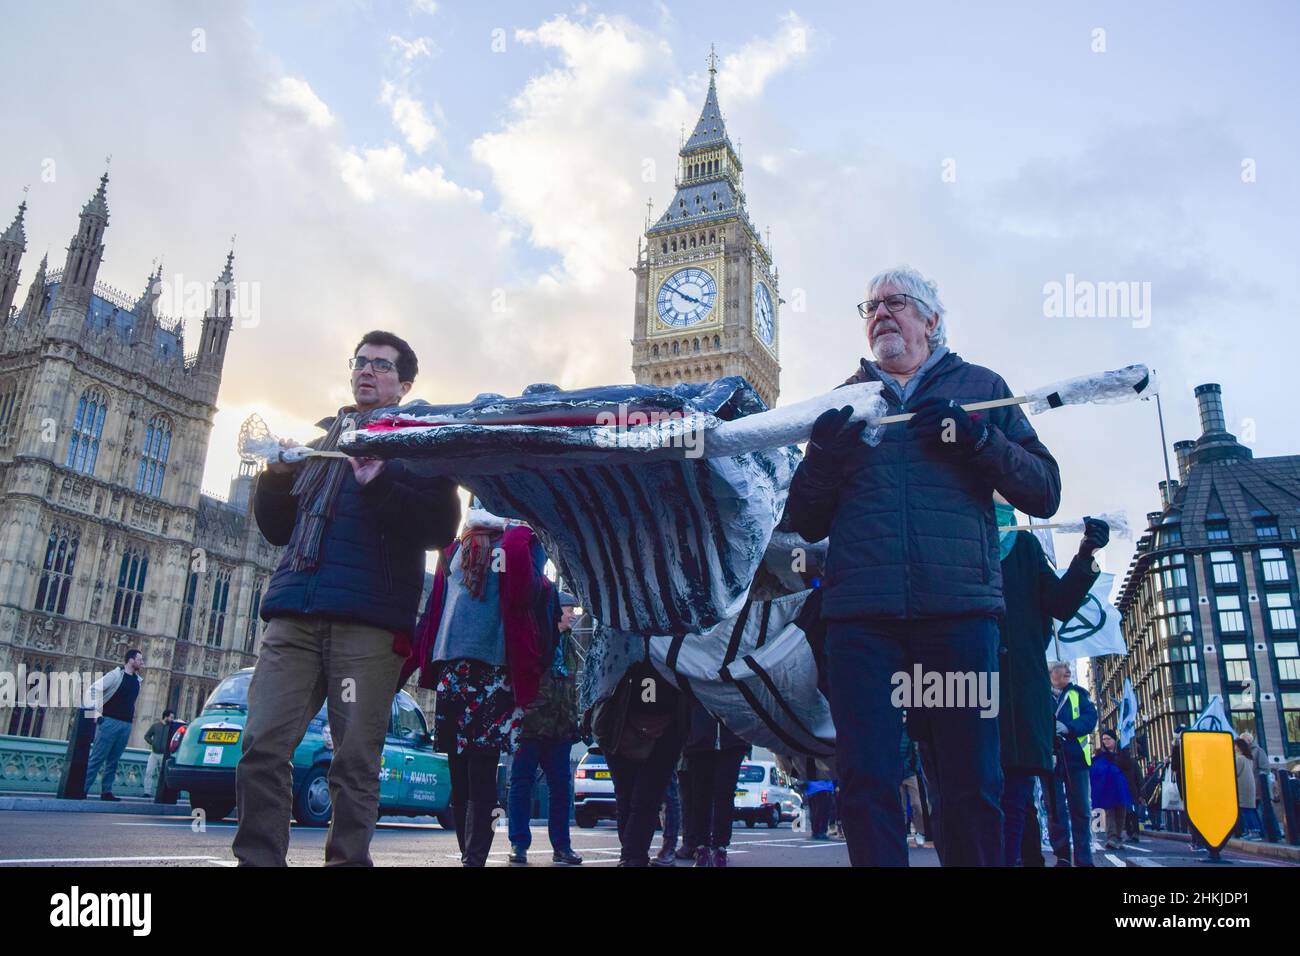 London, UK. 04th Feb, 2022. Demonstrators carry a model whale on Westminster Bridge during the protest. Activists marched with a model whale from Parliament Square to Shell's London headquarters as part of the Global Coastline Rebellion, in protest against the destruction of oceans and ocean wildlife caused by fracking, drilling, seismic surveys and pollution by oil companies. (Photo by Vuk Valcic/SOPA Images/Sipa USA) Credit: Sipa USA/Alamy Live News Stock Photo